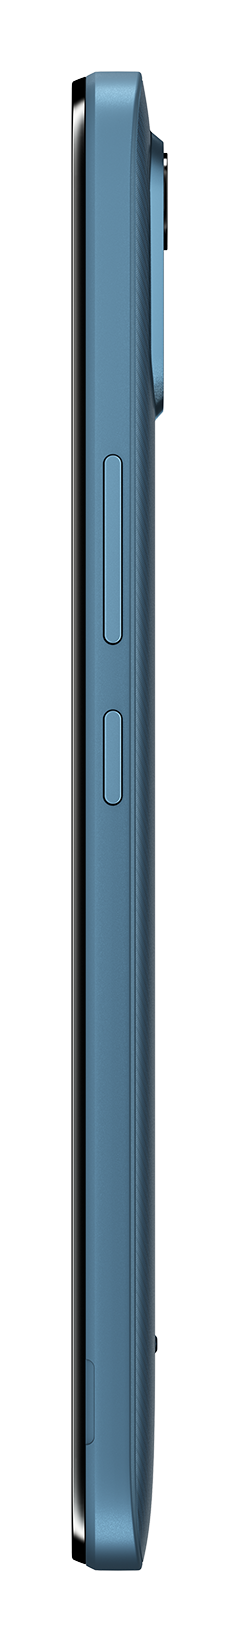 Nokia C12 blue right side